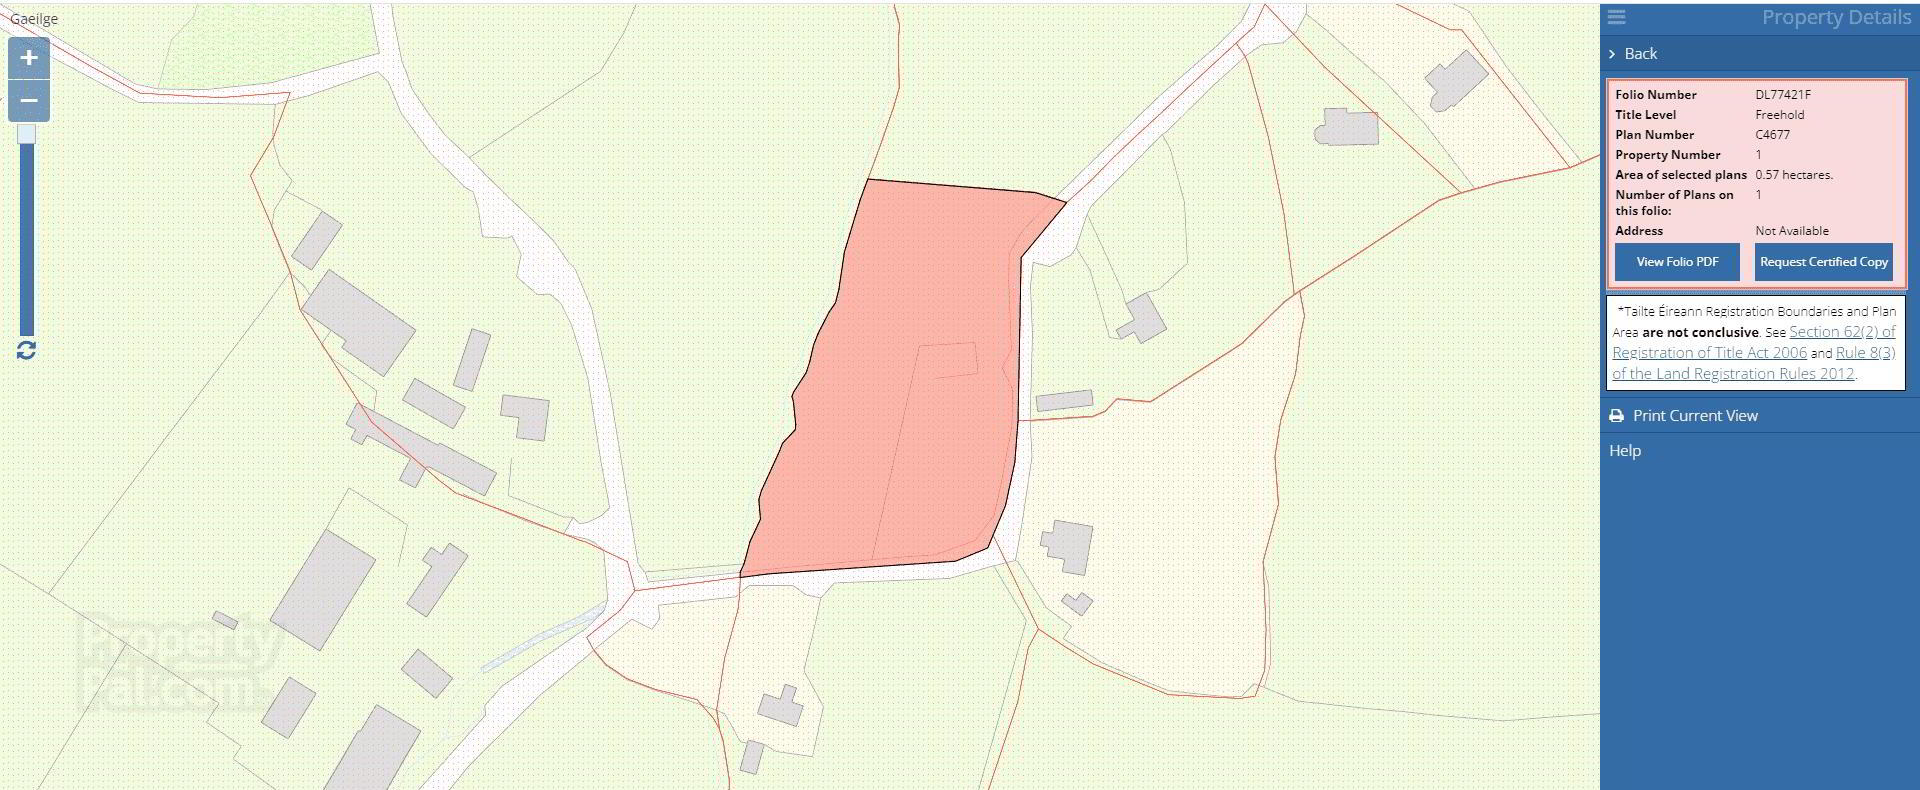 Large, 1 43acre Site For Sale With Full Planning Permission